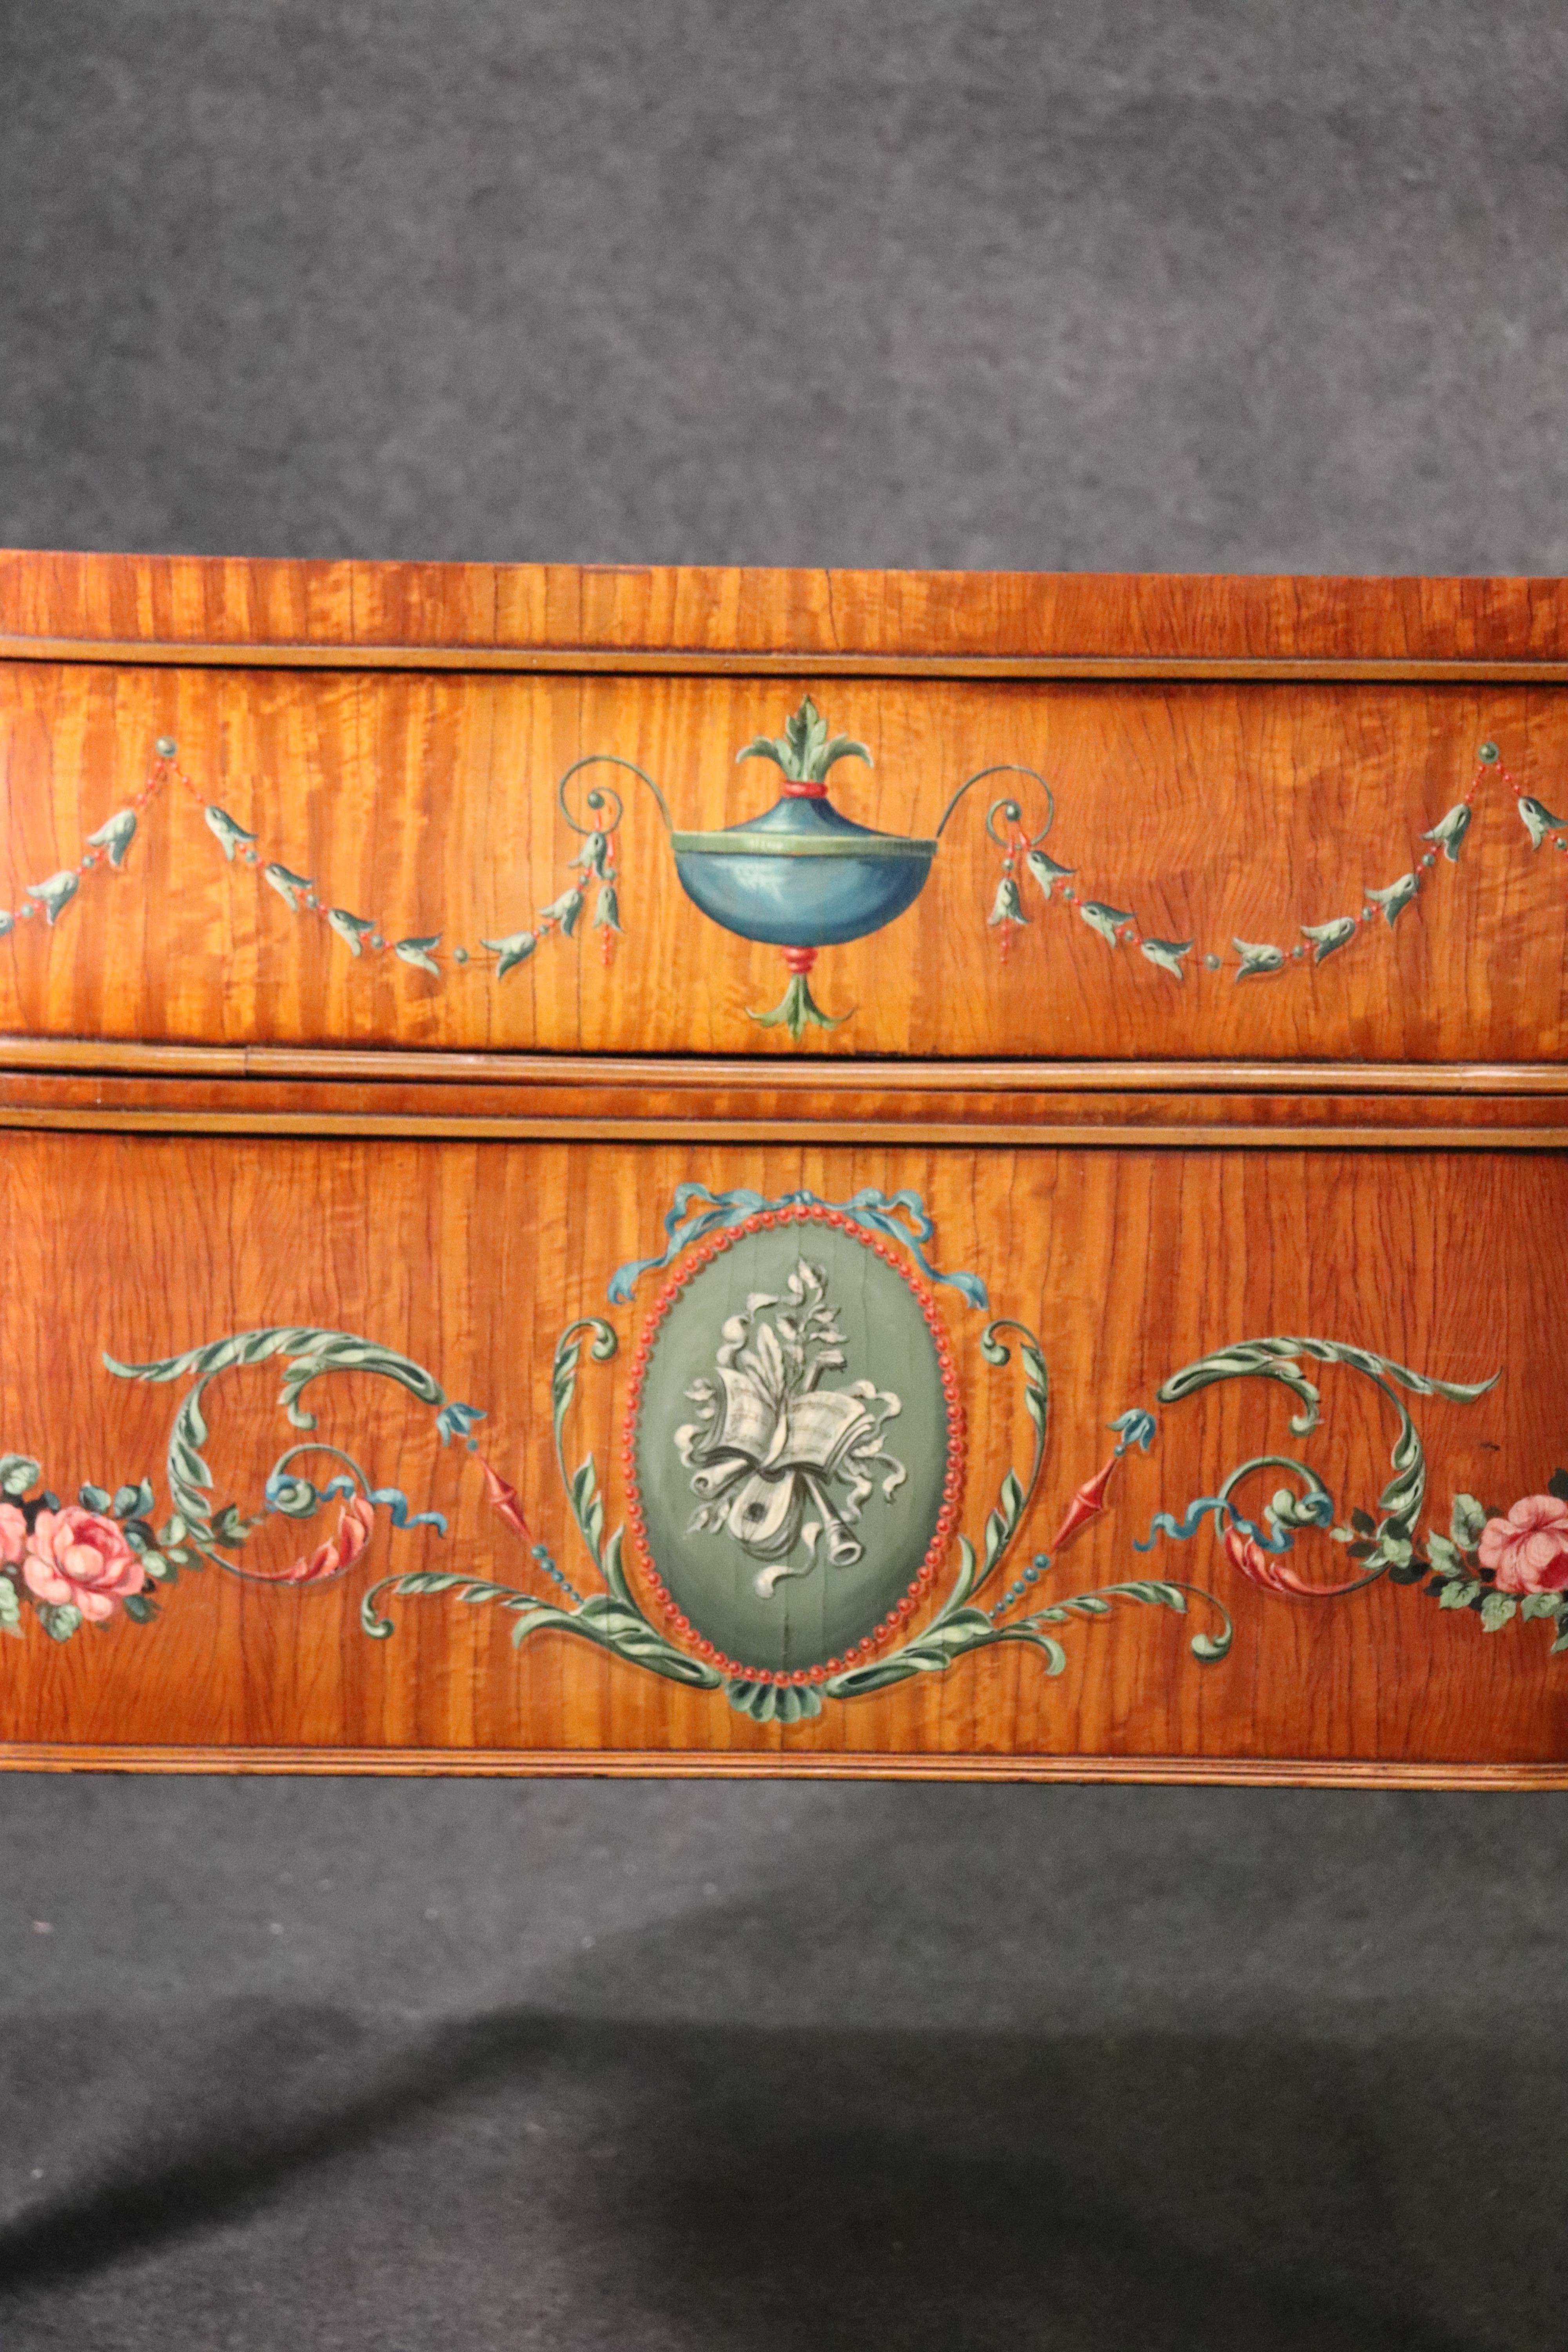 Early 20th Century English Adams Painted Decorated Satinwood Carlton House Desk, circa 1900